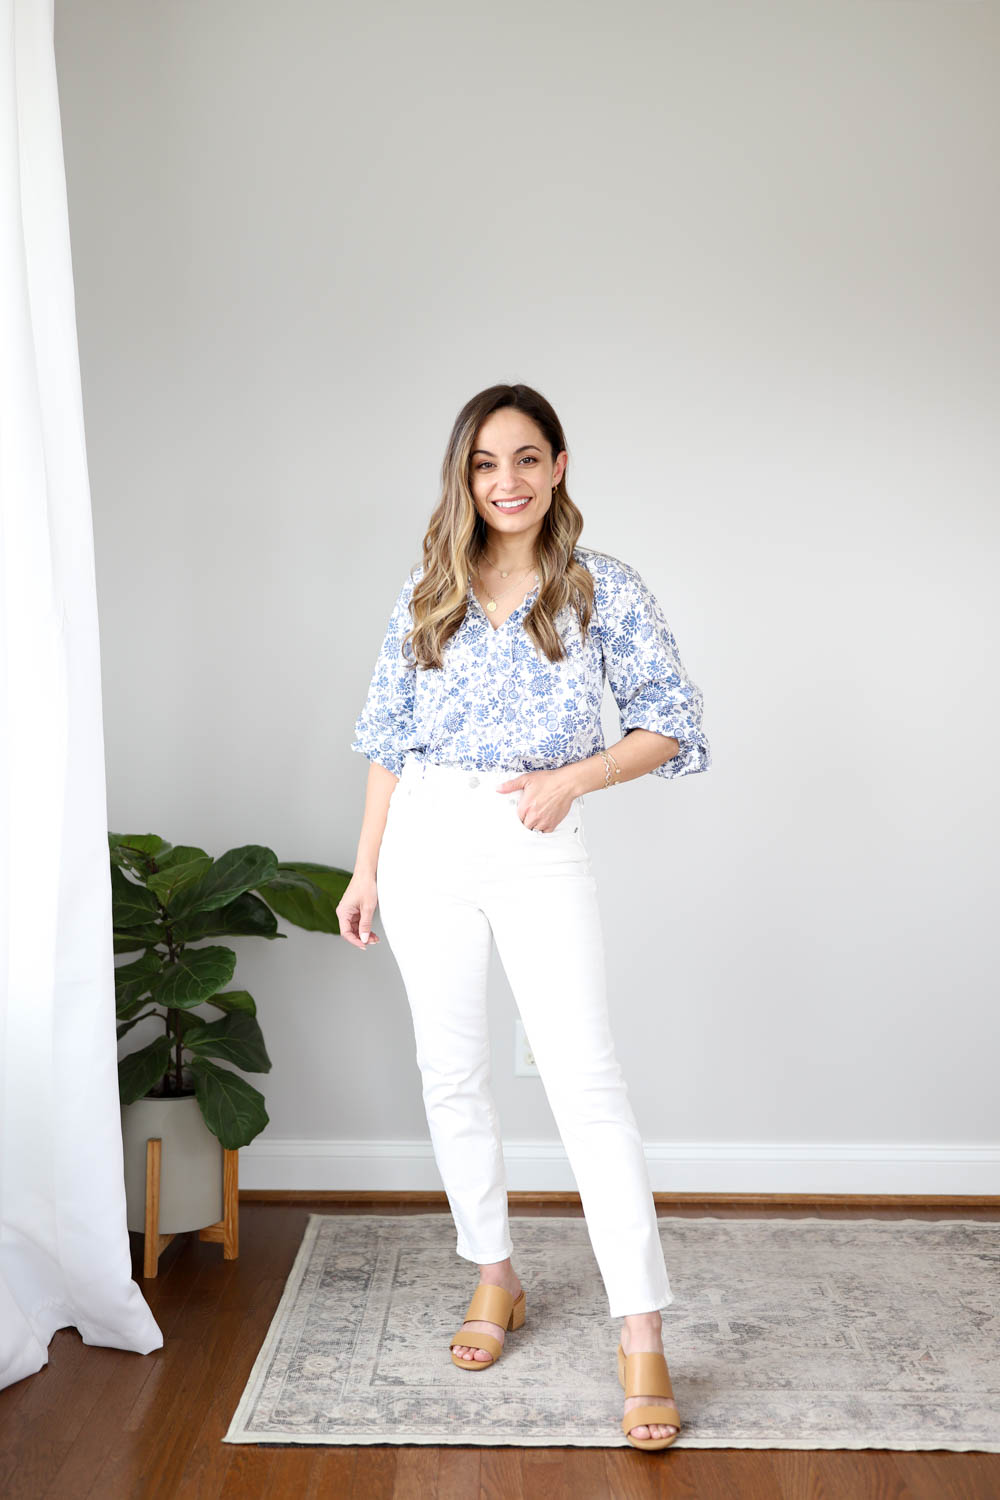 Outfits for Work With Jeans - Pumps & Push Ups